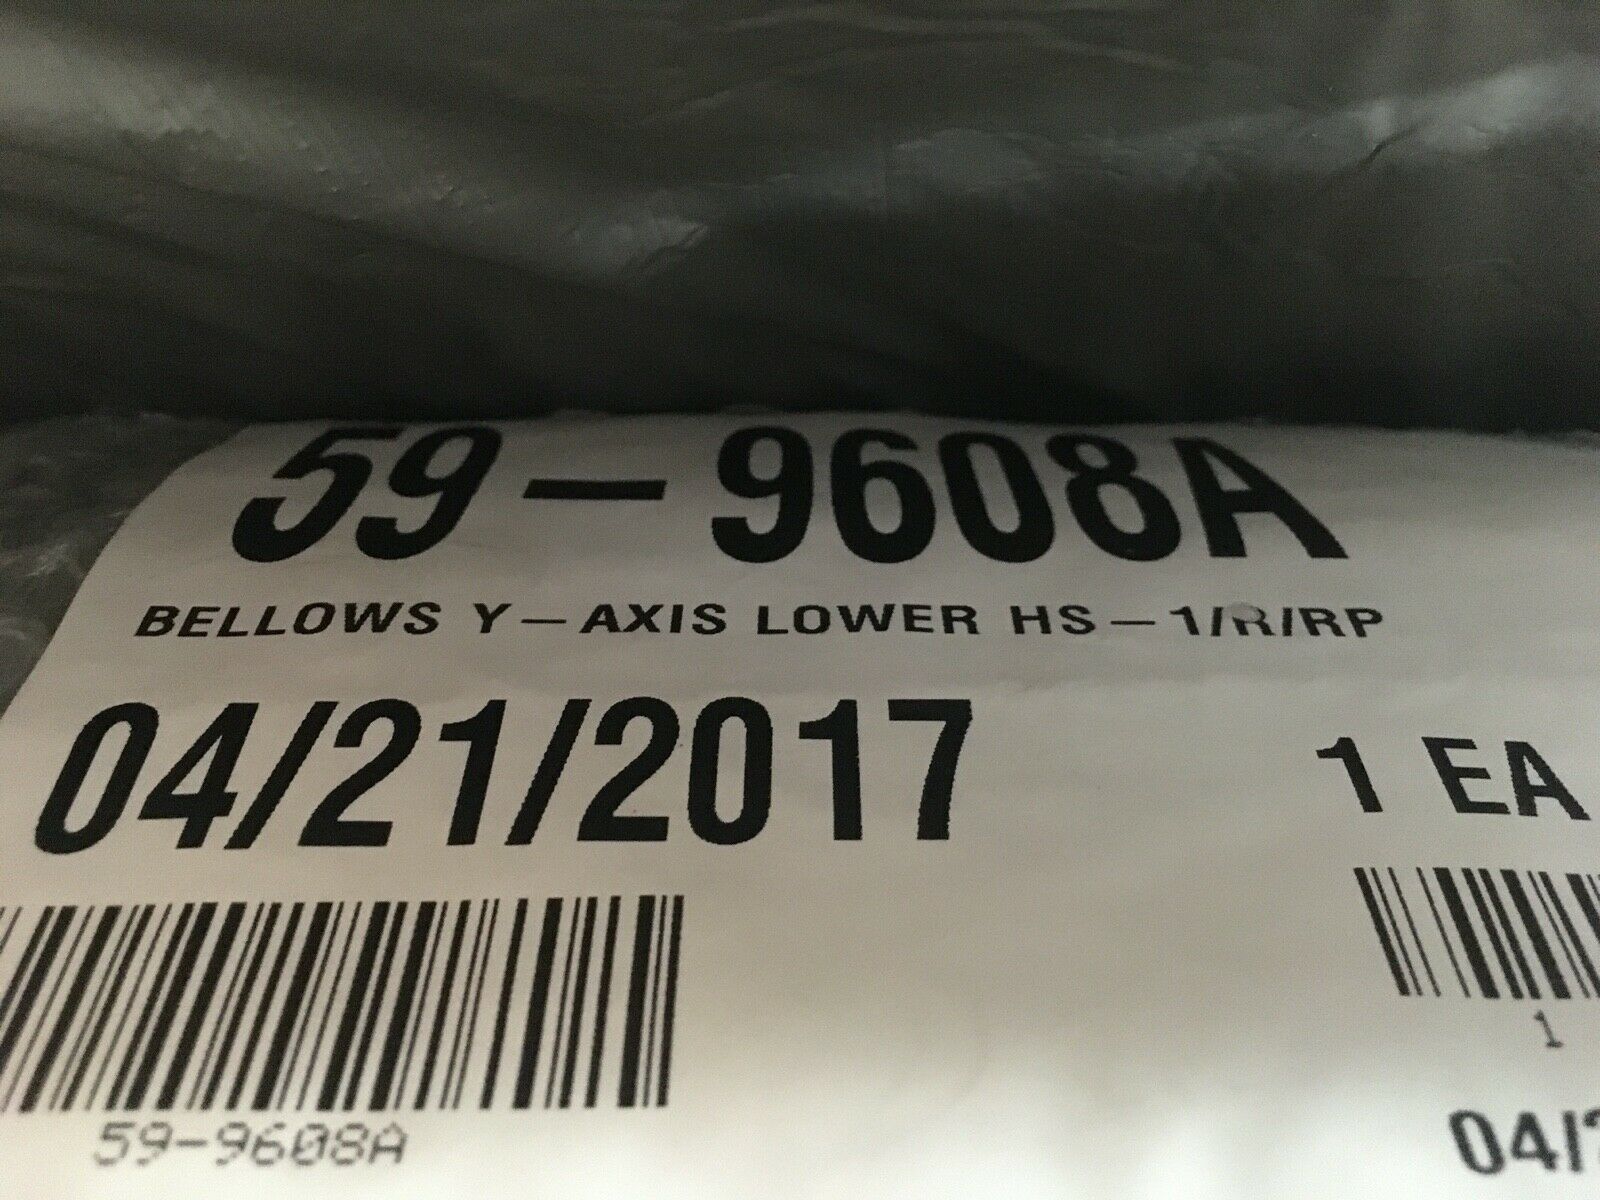 New Oem Haas Bellows 25.90in Y-axis Lower Hs-1/r/rp 59-9608a Cnc Rail Cover